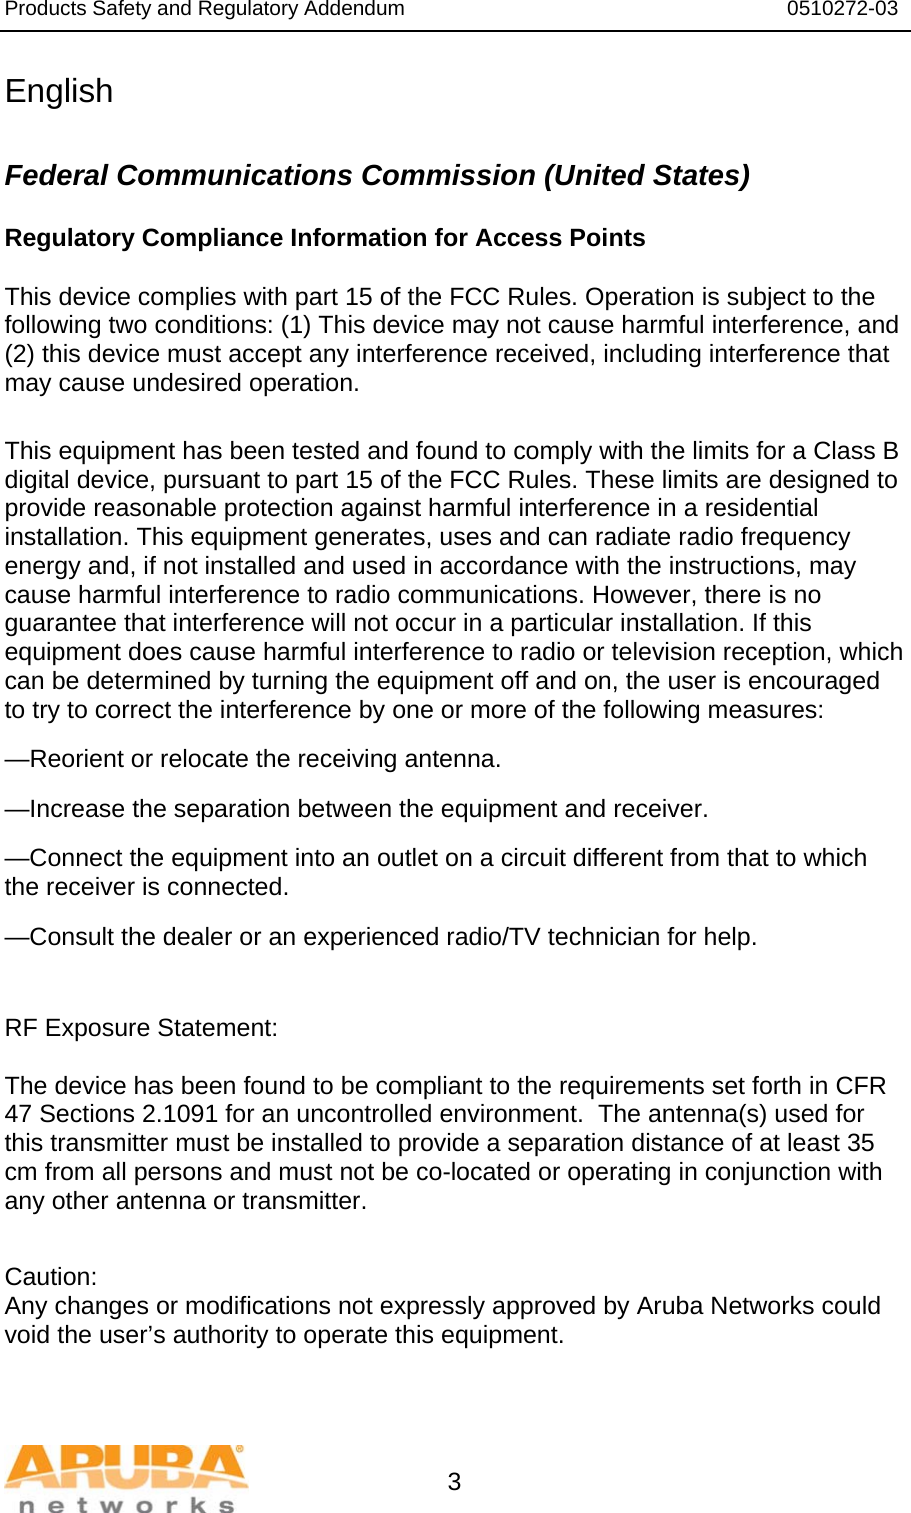 Products Safety and Regulatory Addendum                                                                  0510272-03   3 English  Federal Communications Commission (United States) Regulatory Compliance Information for Access Points    This device complies with part 15 of the FCC Rules. Operation is subject to the following two conditions: (1) This device may not cause harmful interference, and (2) this device must accept any interference received, including interference that may cause undesired operation.  This equipment has been tested and found to comply with the limits for a Class B digital device, pursuant to part 15 of the FCC Rules. These limits are designed to provide reasonable protection against harmful interference in a residential installation. This equipment generates, uses and can radiate radio frequency energy and, if not installed and used in accordance with the instructions, may cause harmful interference to radio communications. However, there is no guarantee that interference will not occur in a particular installation. If this equipment does cause harmful interference to radio or television reception, which can be determined by turning the equipment off and on, the user is encouraged to try to correct the interference by one or more of the following measures: —Reorient or relocate the receiving antenna. —Increase the separation between the equipment and receiver. —Connect the equipment into an outlet on a circuit different from that to which       the receiver is connected. —Consult the dealer or an experienced radio/TV technician for help.   RF Exposure Statement:  The device has been found to be compliant to the requirements set forth in CFR 47 Sections 2.1091 for an uncontrolled environment.  The antenna(s) used for this transmitter must be installed to provide a separation distance of at least 35 cm from all persons and must not be co-located or operating in conjunction with any other antenna or transmitter.   Caution: Any changes or modifications not expressly approved by Aruba Networks could void the user’s authority to operate this equipment.   